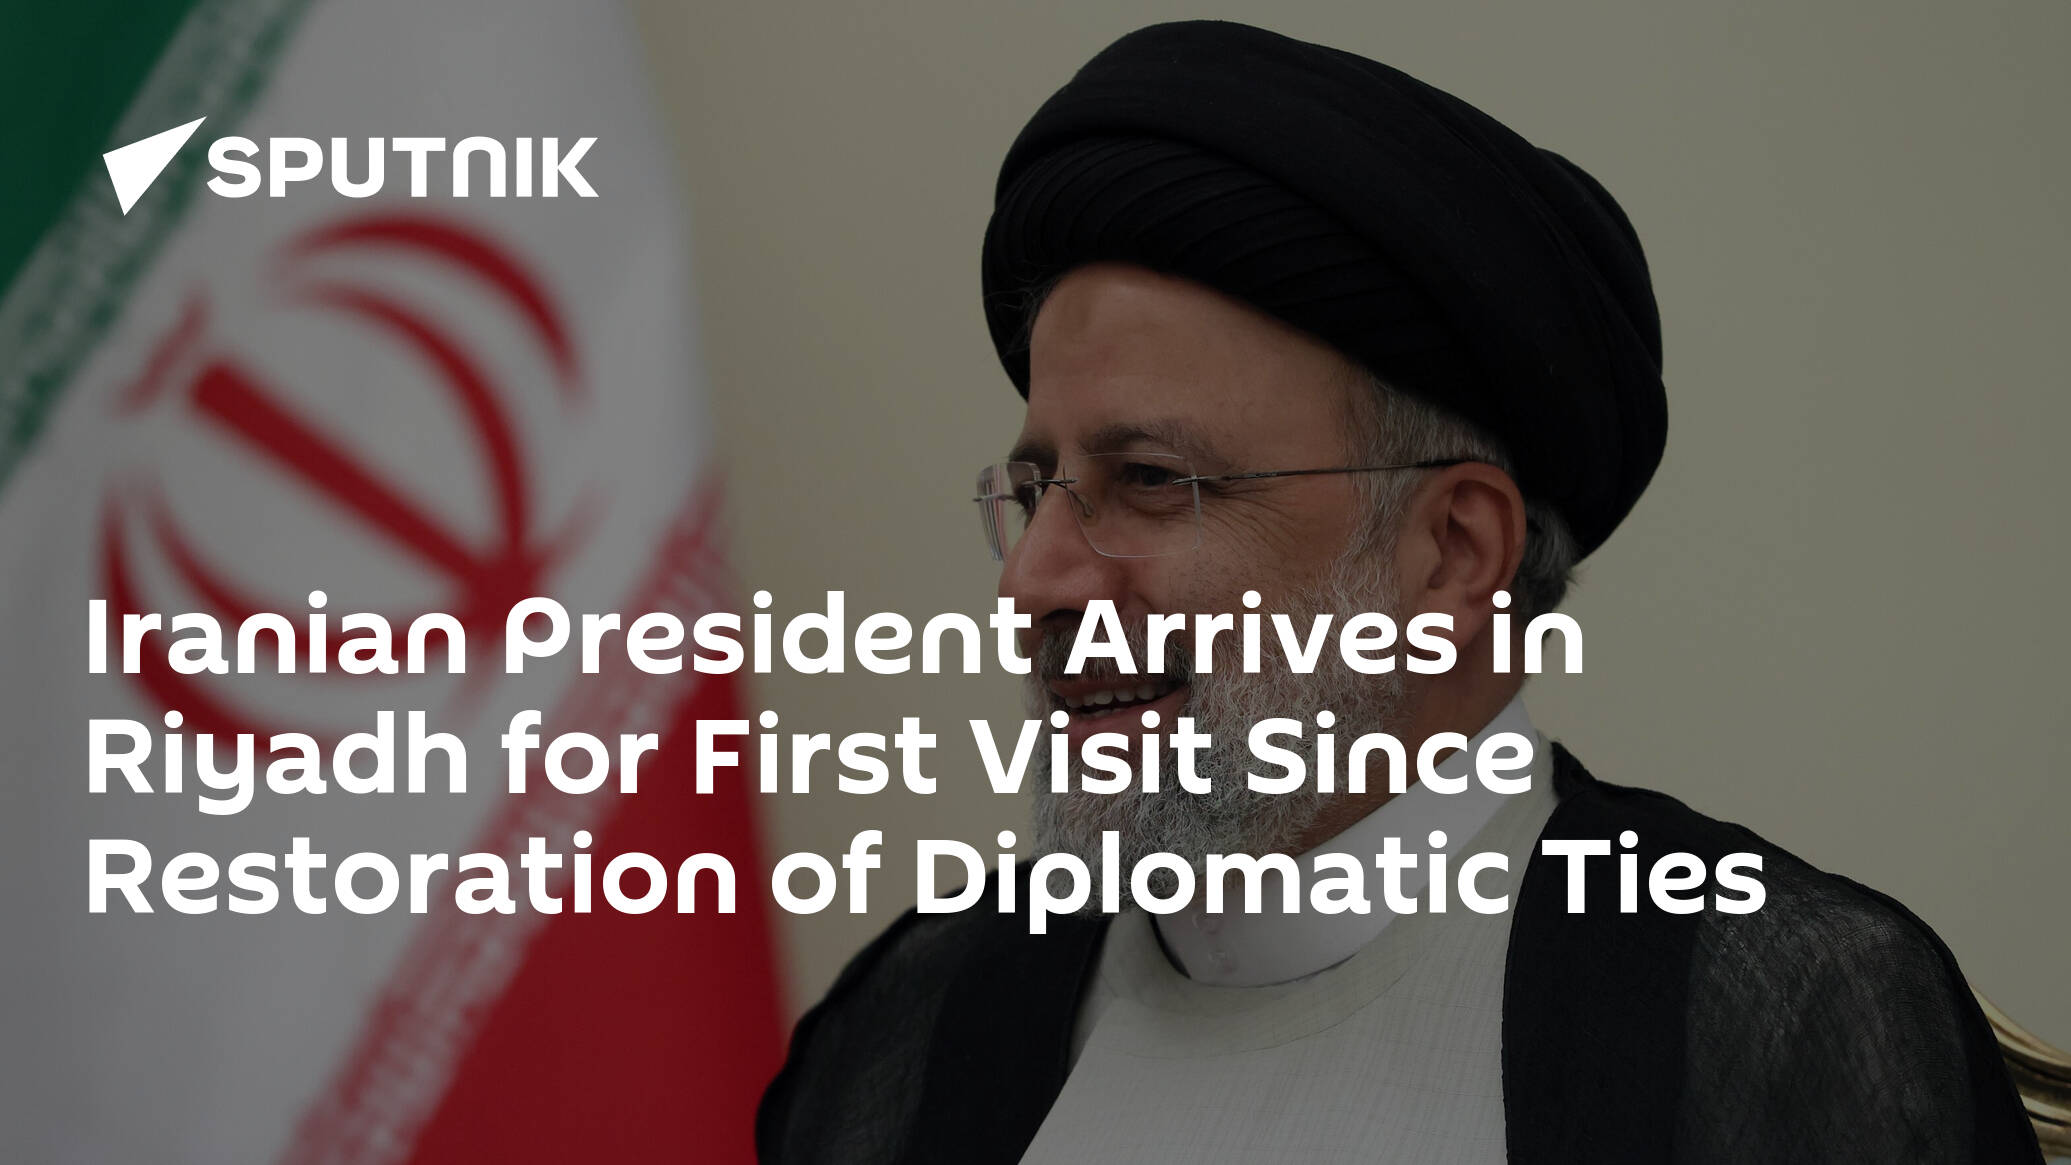 Iranian President Arrives in Riyadh for First Visit Since Restoration of Diplomatic Ties